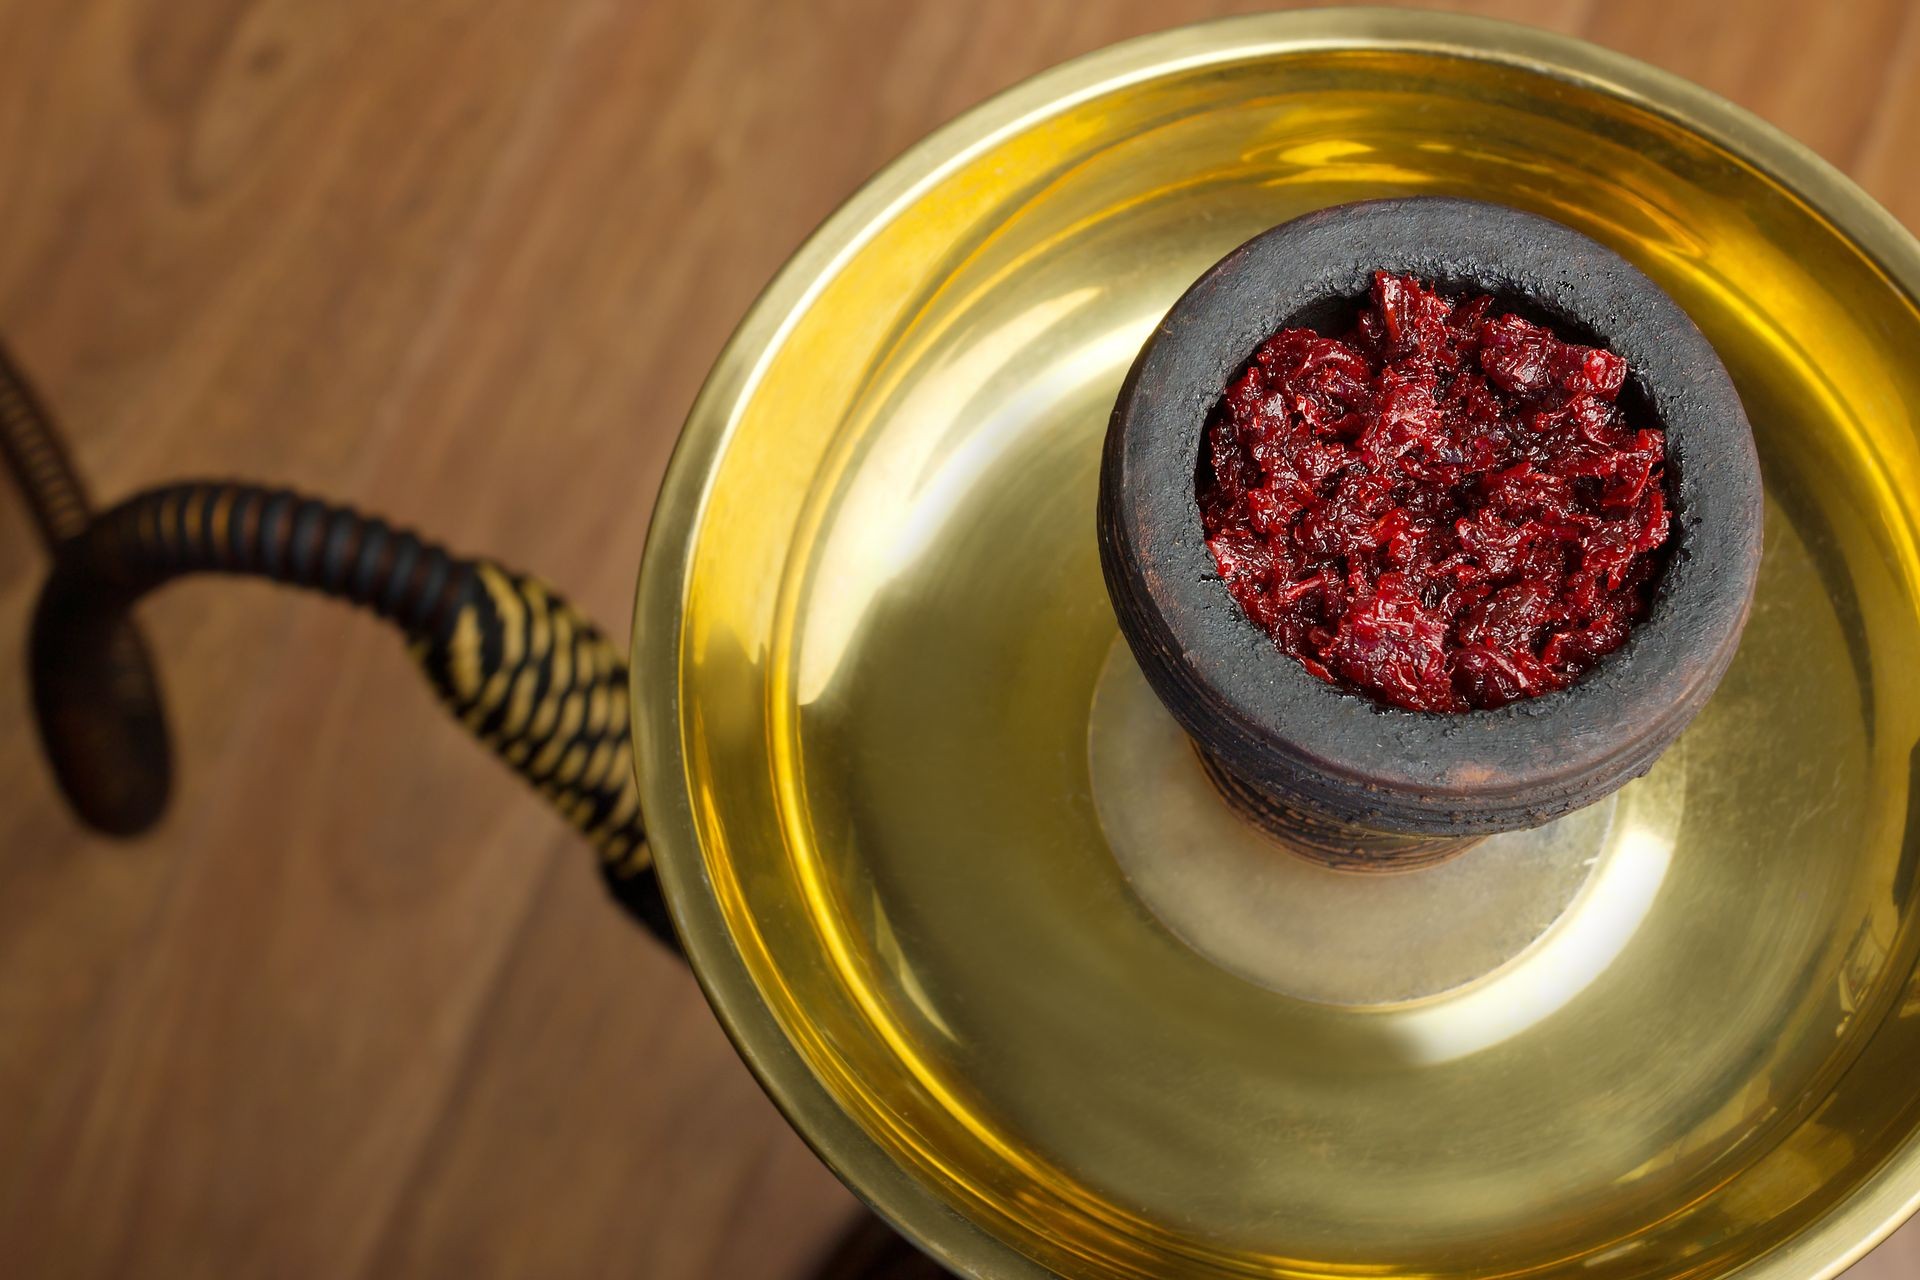 preparation of hookah,fruit-flavoured tobacco in the bowl of a shisha